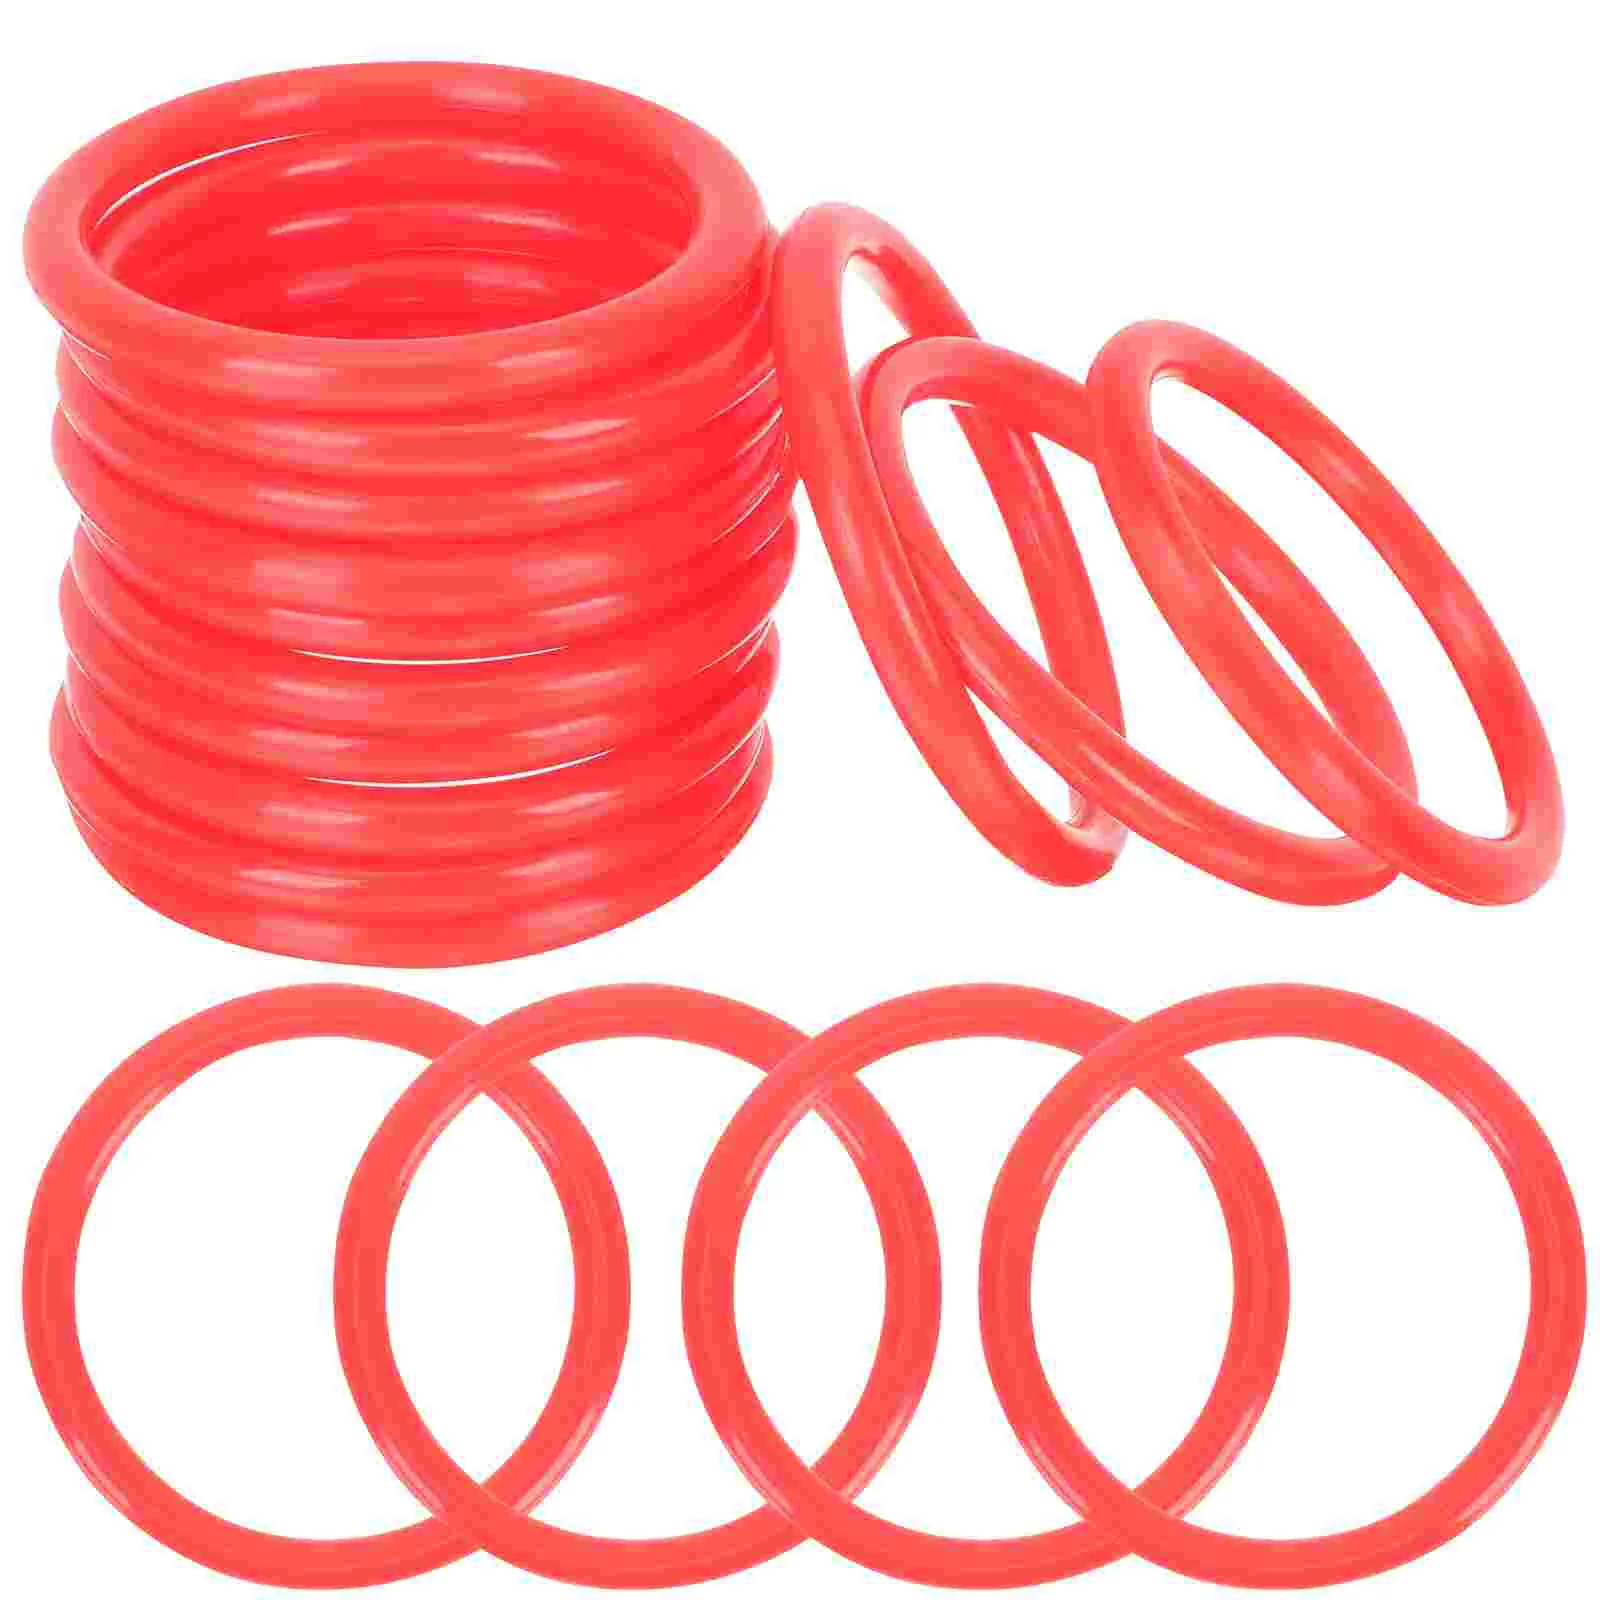 

24Pcs Plastic Toss Rings Carnival Rings Colorful Toss Rings Outdoor Tossing Toys Party Props